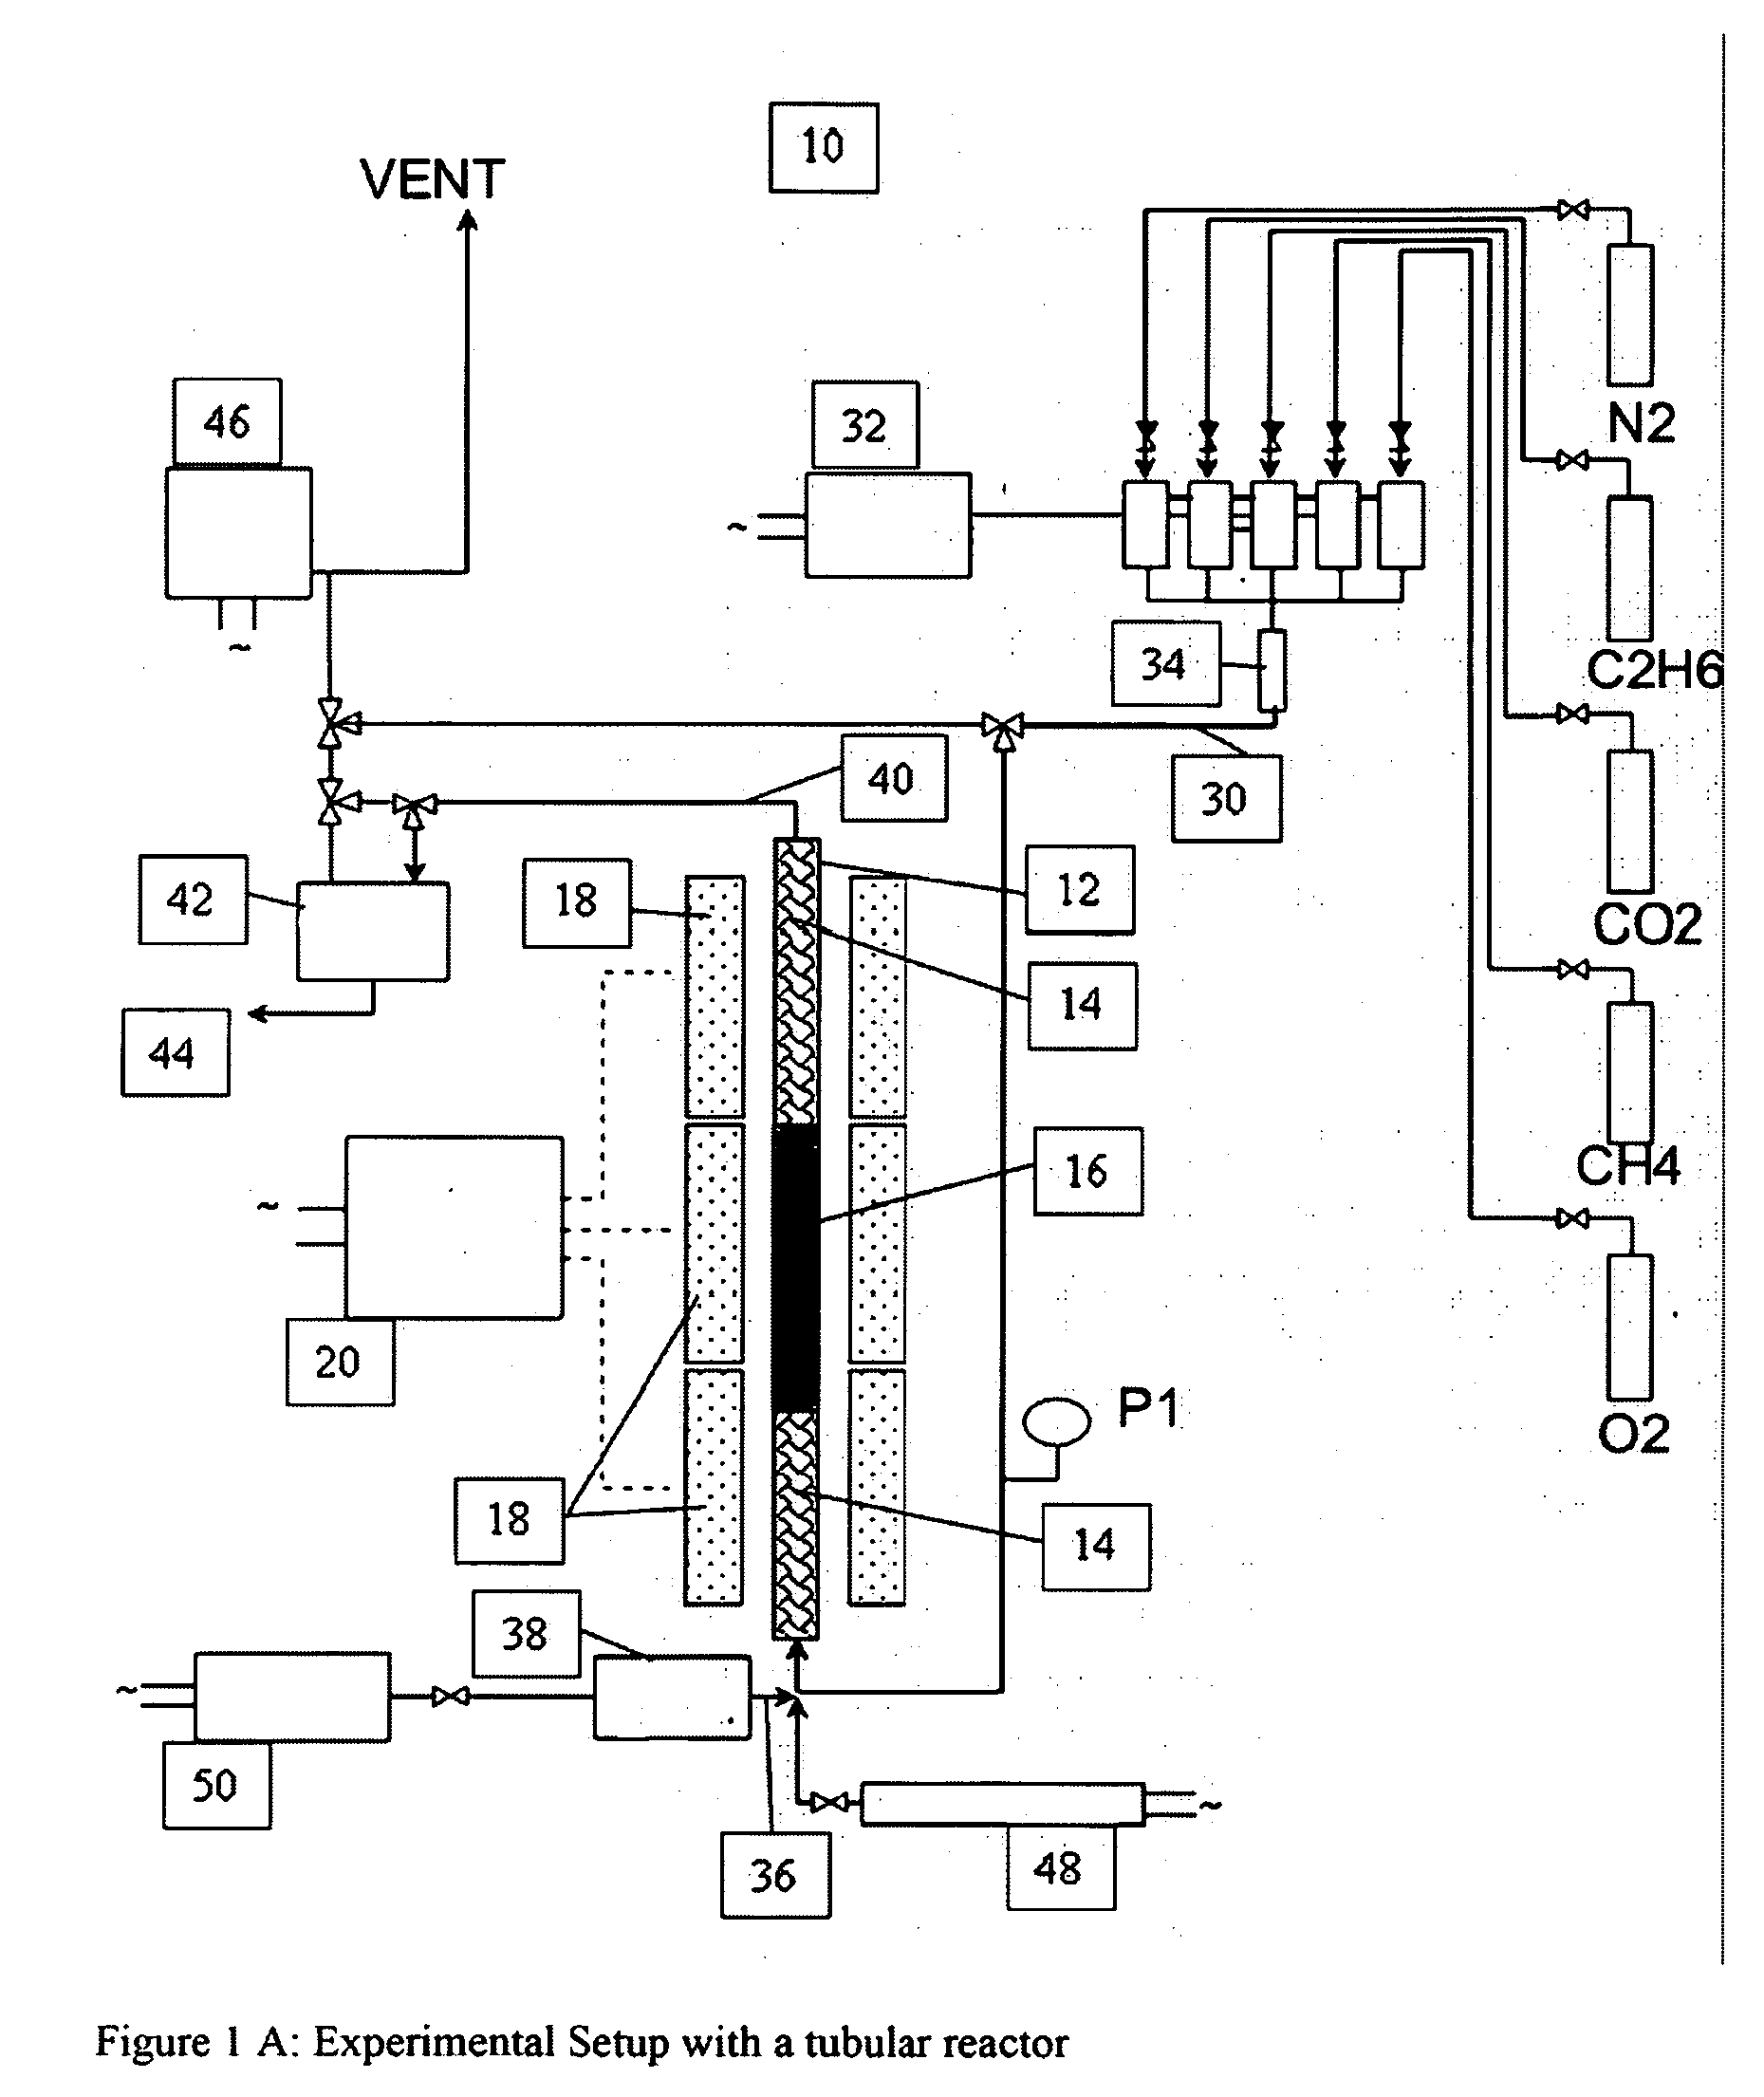 Catalyst and method for converting natural gas to higher carbon compounds